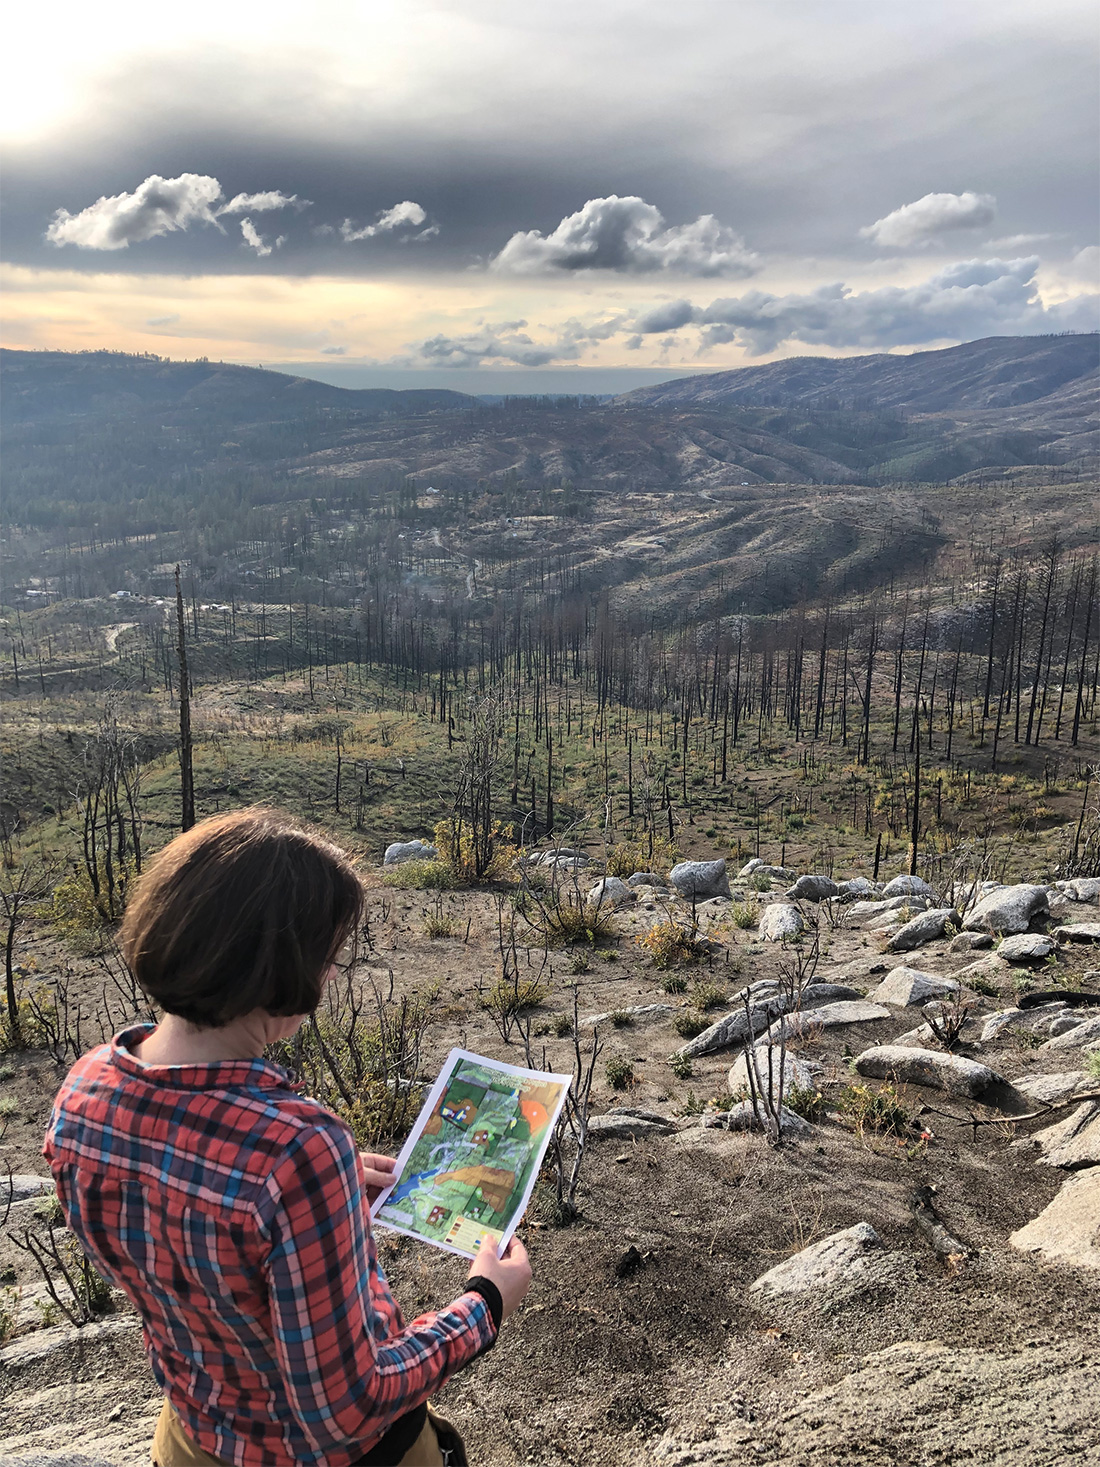 Wolfy Rougle, of the Butte County Resource Conservation District, stands above the Concow Basin, surveying draft plans for three innovative reforestation trials to regrow forests after the Camp Fire.